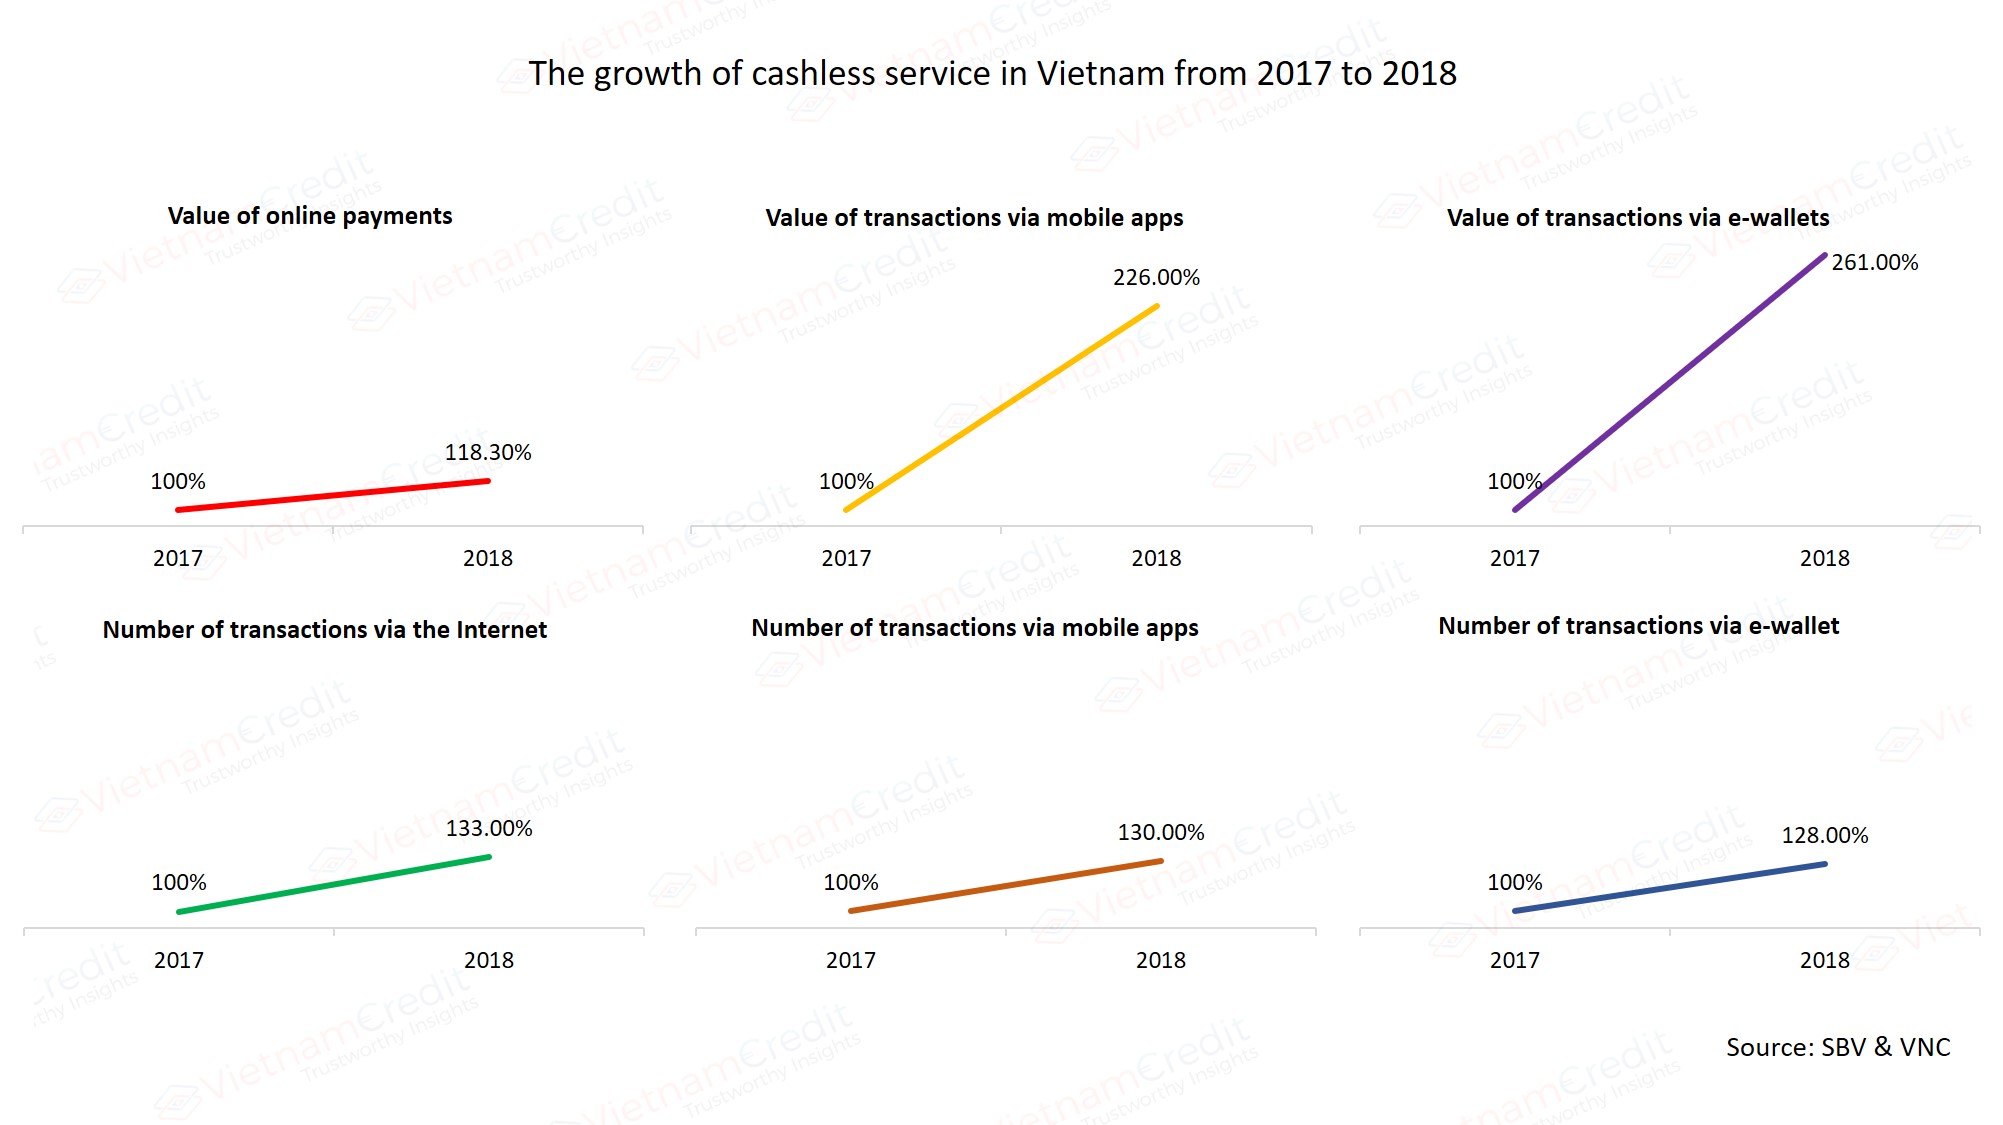 CASHLESS SERVICE IN VIETNAM EXPERIENCED A REMARKABLE GROWTH THIS YEAR